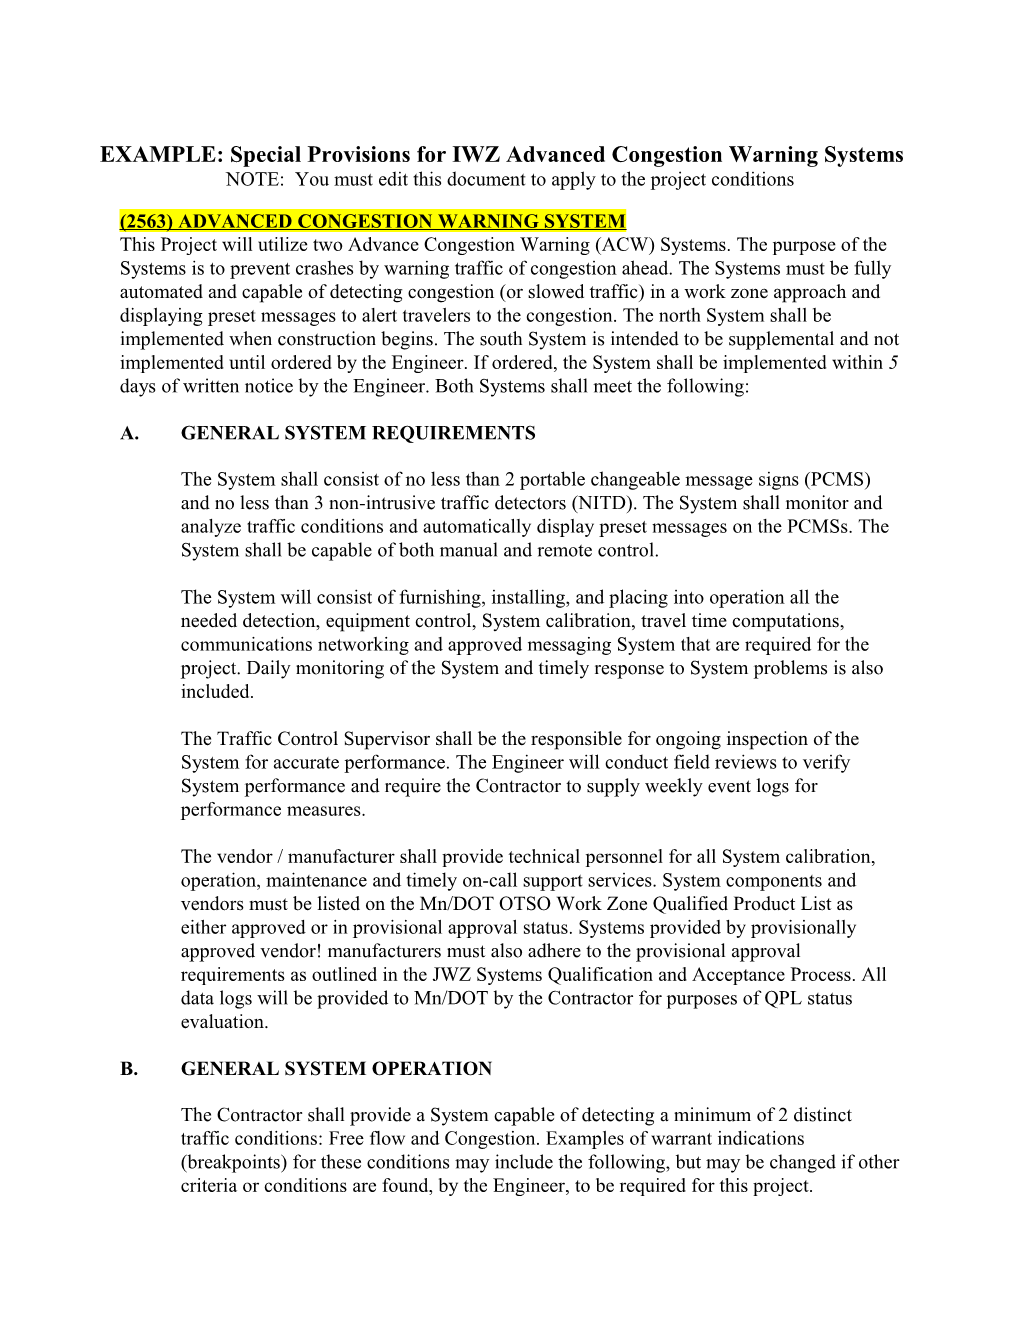 EXAMPLE: Special Provisions for IWZ Advanced Congestion Warning Systems